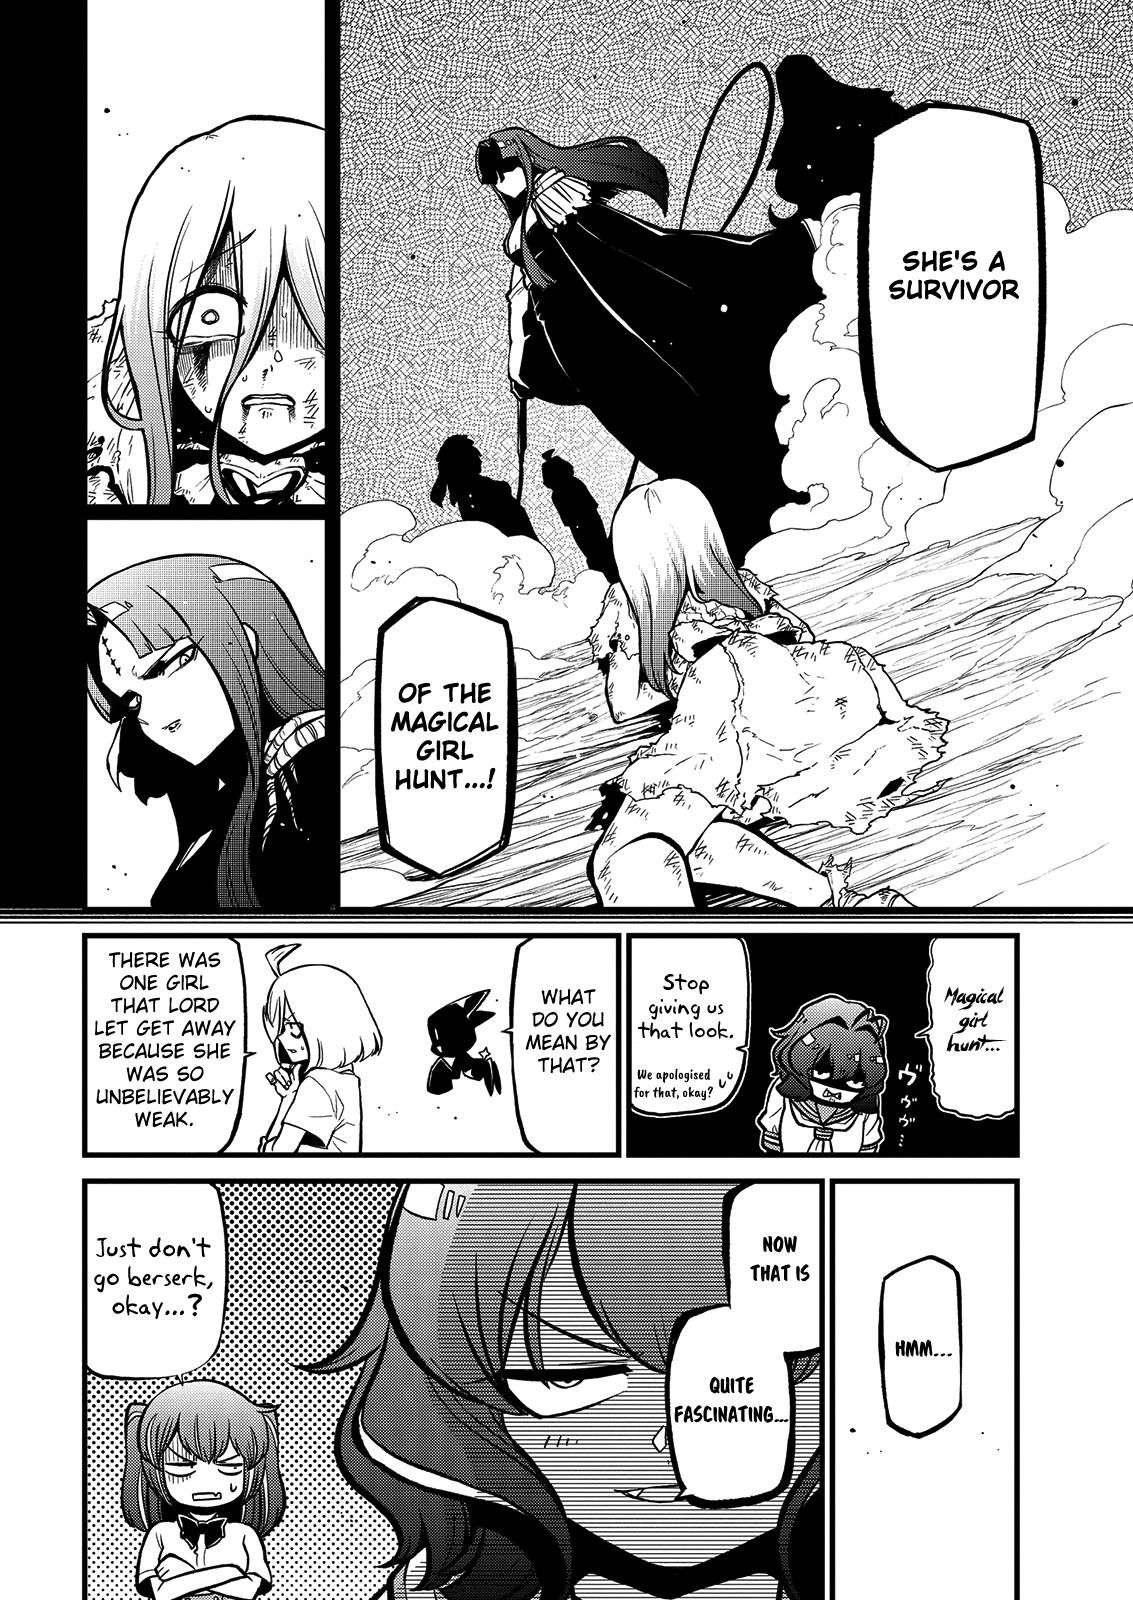 Gushing over Magical Girls - chapter 39 - #6